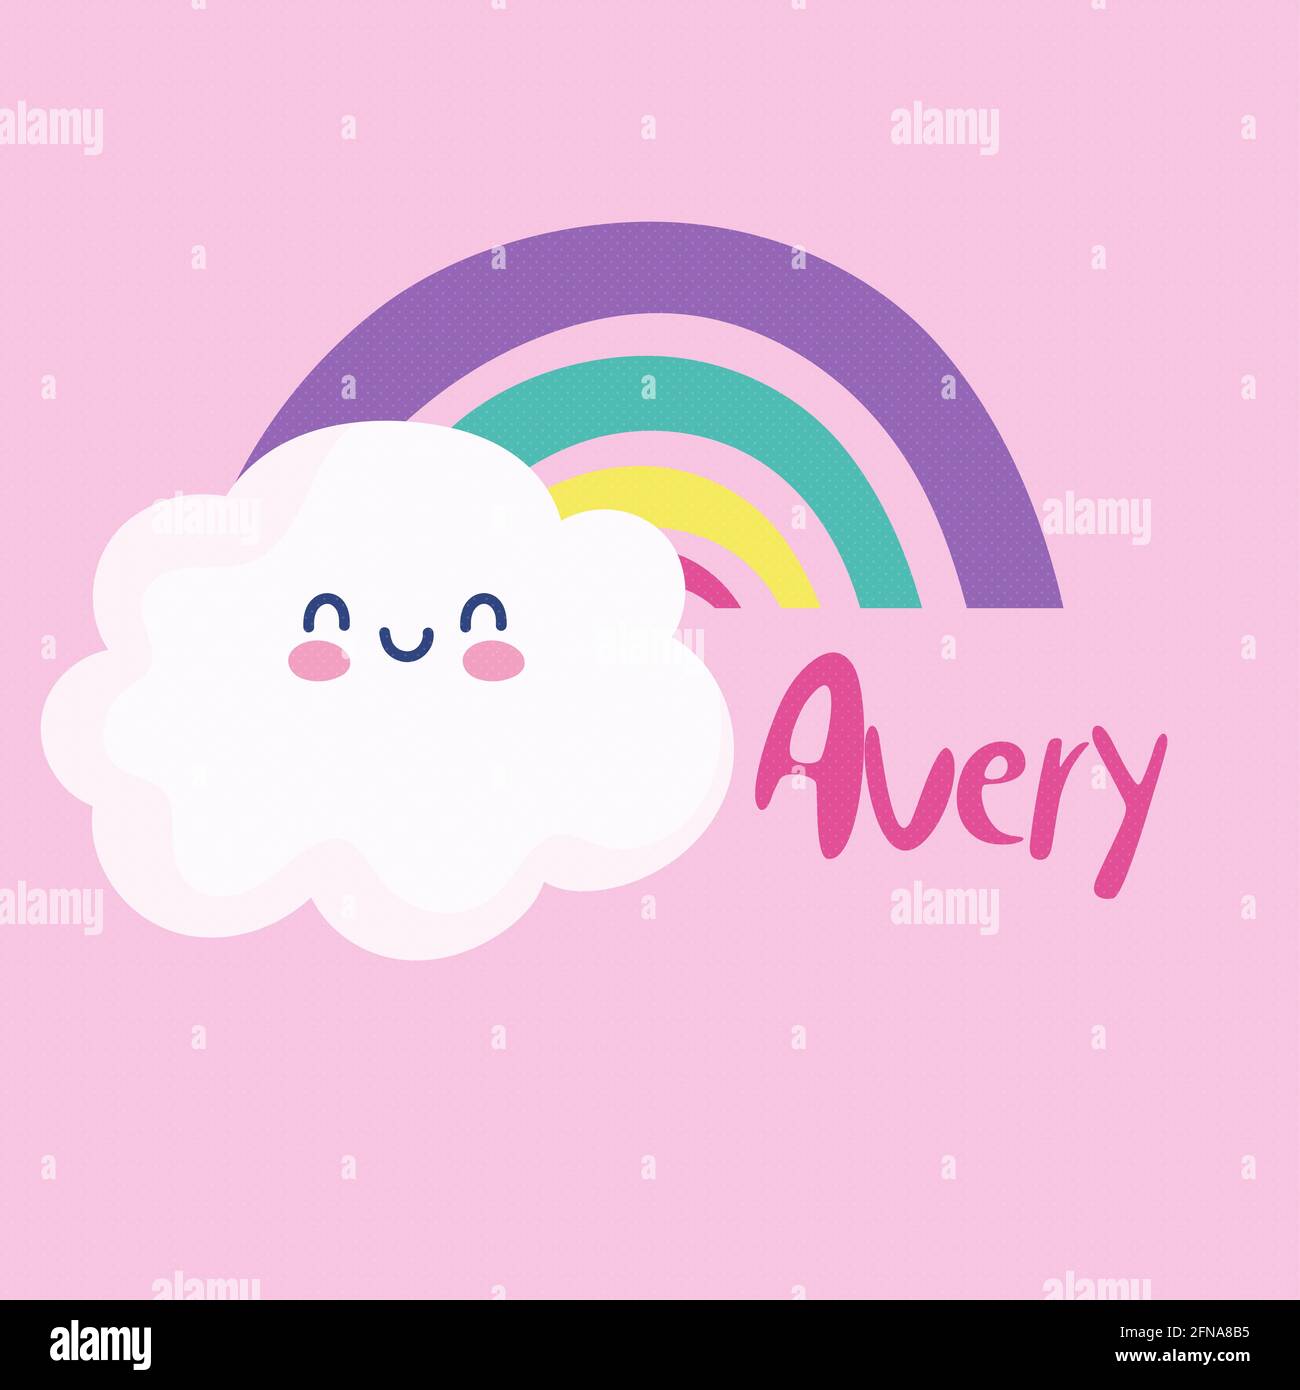 Preview of Pink Neon 3D name for avery